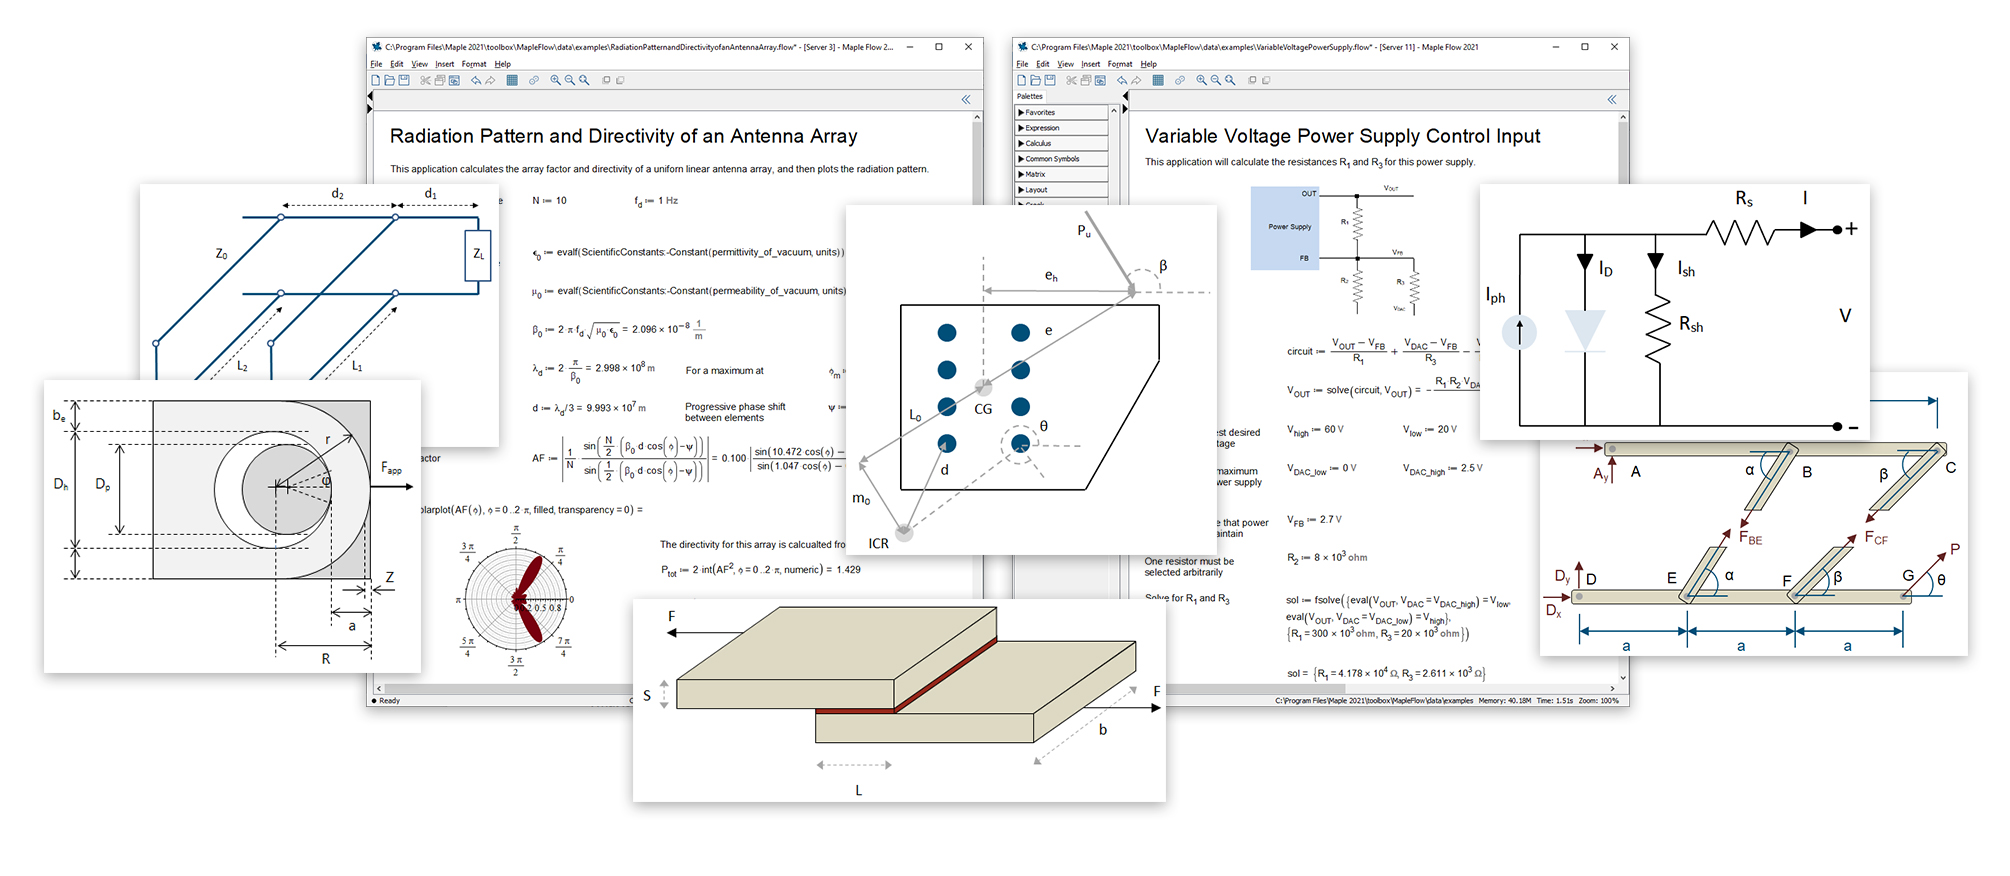 Maple Flow is a new calculation tool that combines a simple, freeform interface with a comprehensive math engine, supporting both daily engineering calculations and the creation of immersive technical reports containing live math.